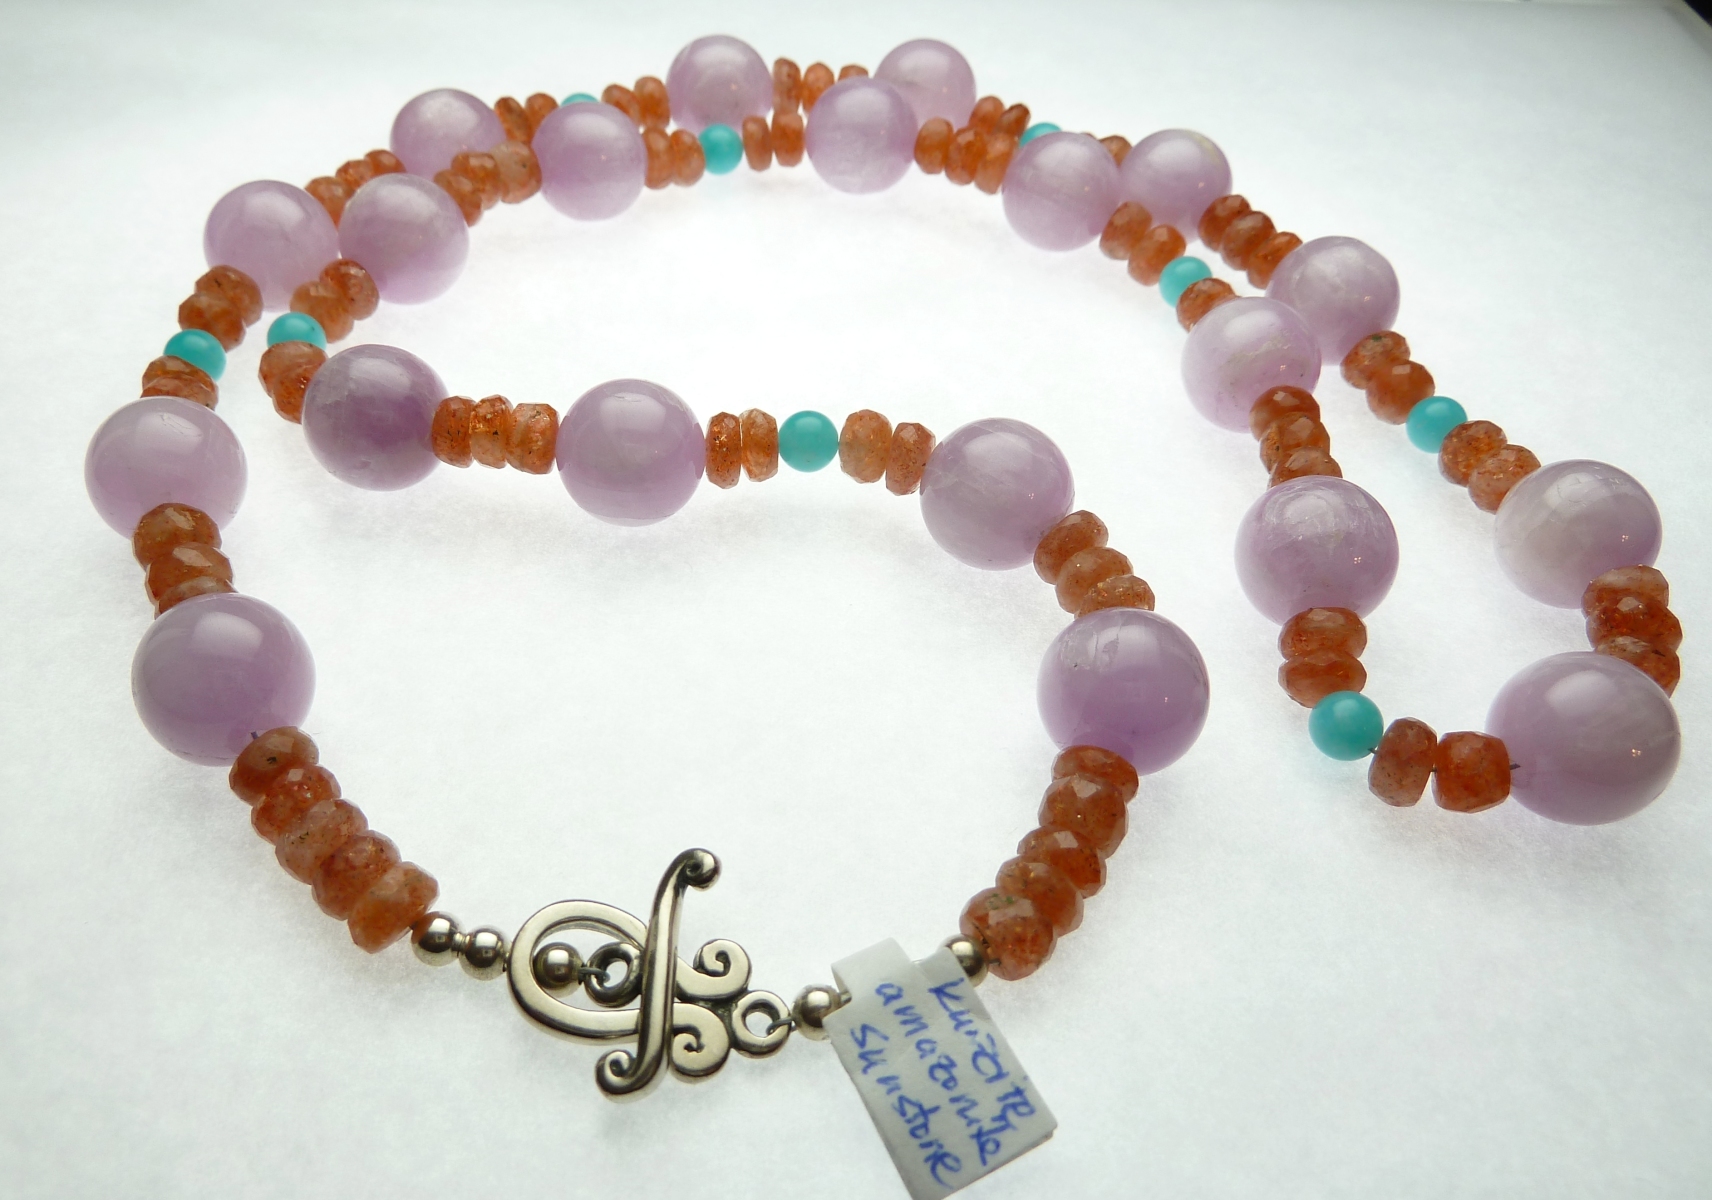 Scaled image P1060608.JPG: Kunzite, Sunstone, Amazonite, and Sterling Silver beads and clasp.� 